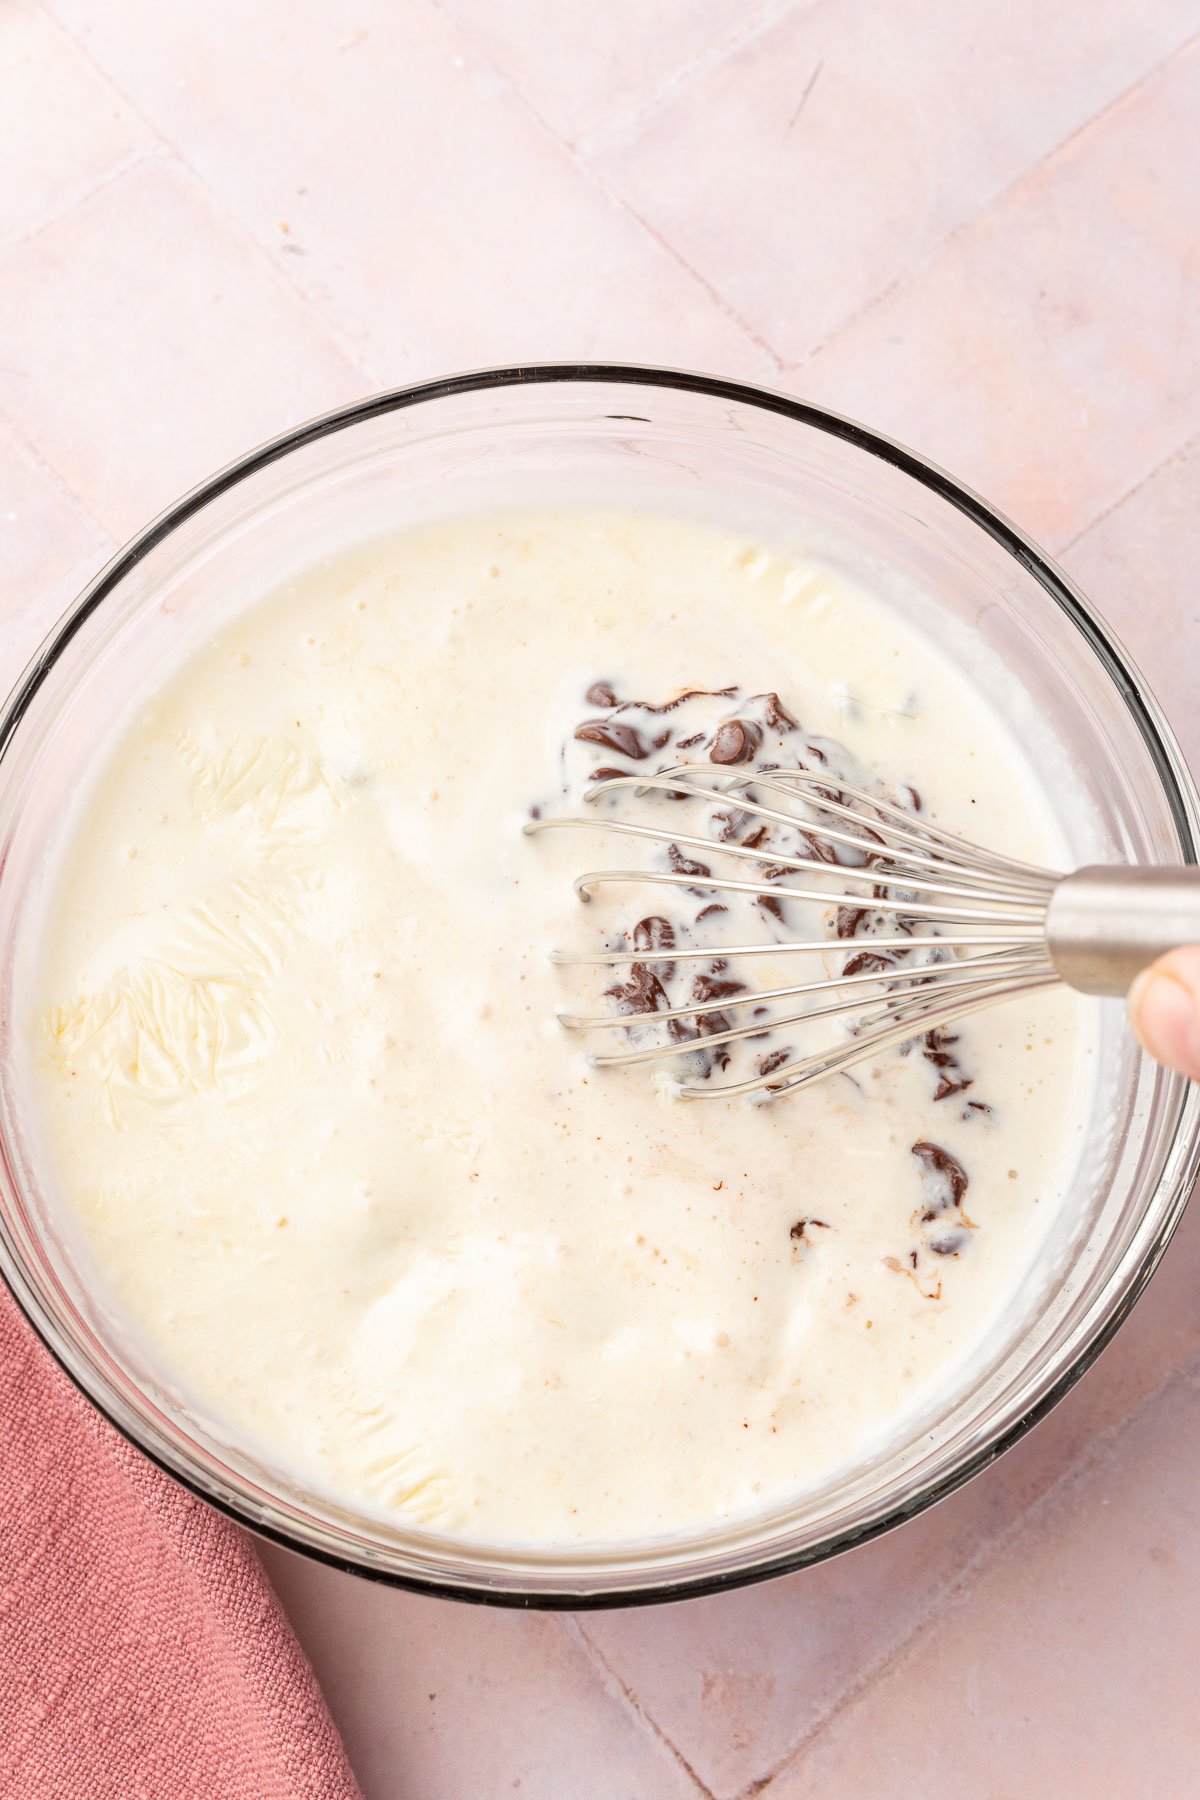 Hot heavy cream being whisked into chocolate chips in a glass mixing bowl to make ganache.